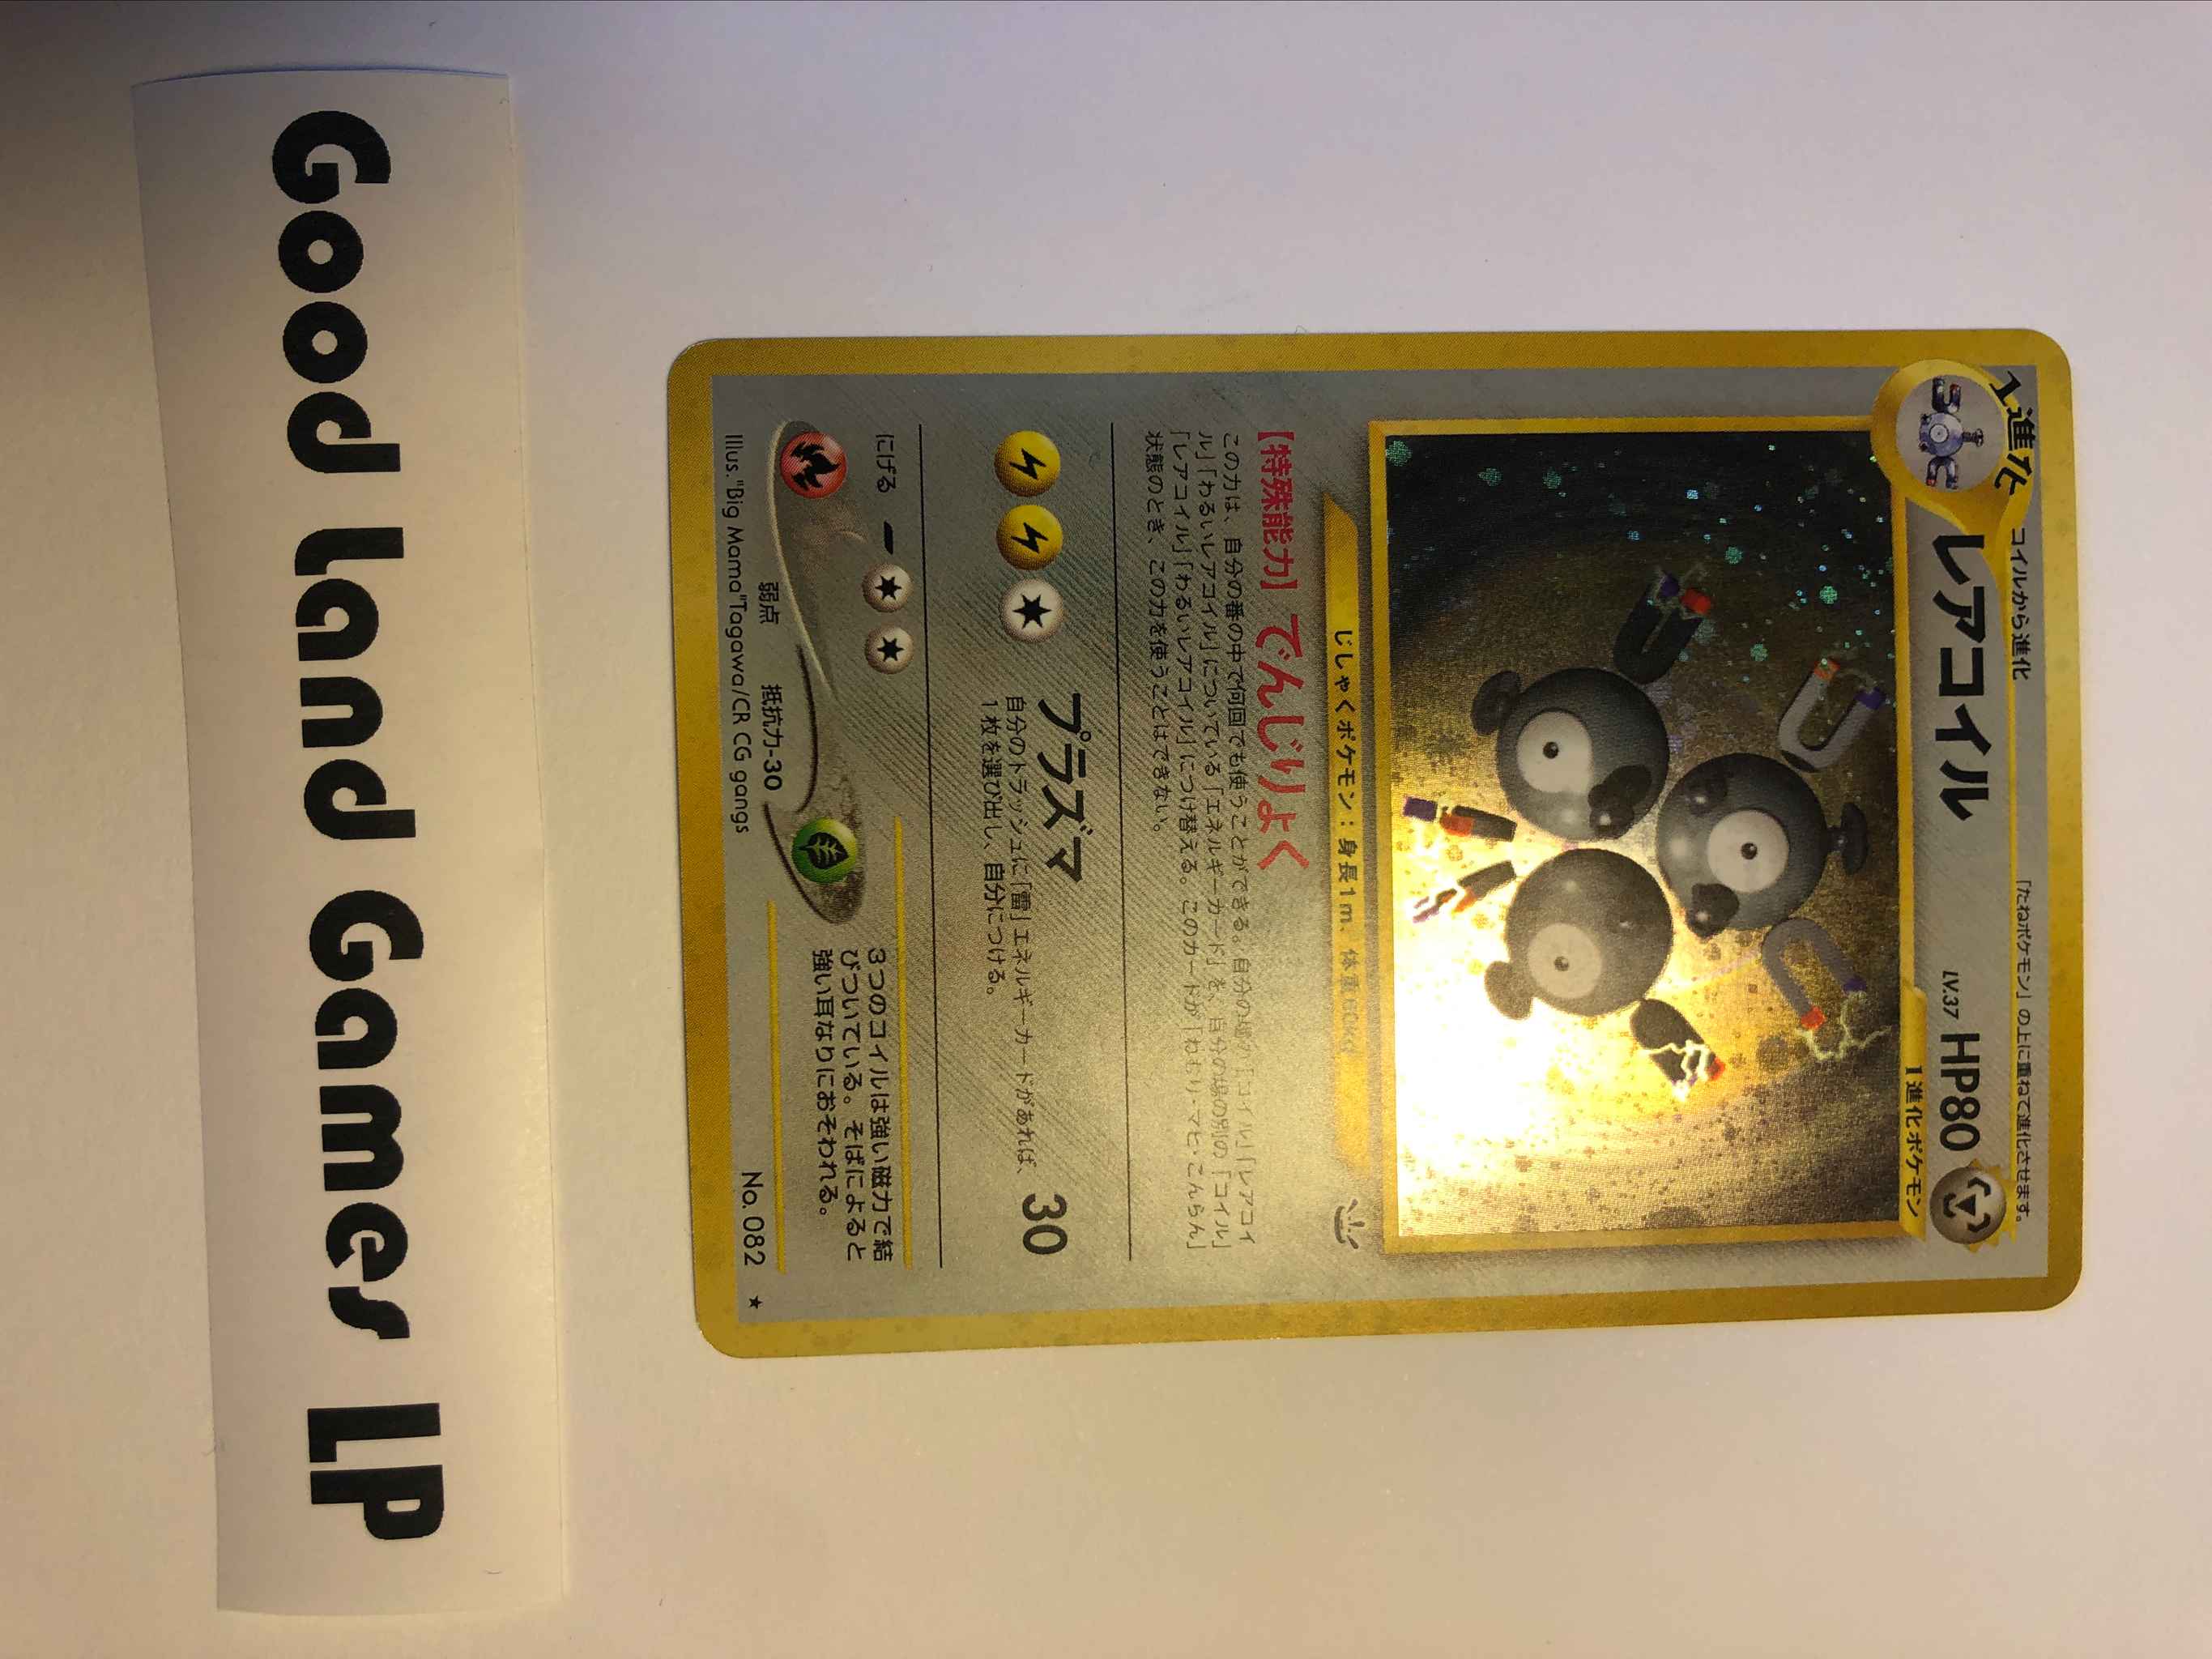 Japanese Lp Holographic Magneton With Photos Magneton Neo Revelation Pokemon Online Gaming Store For Cards Miniatures Singles Packs Booster Boxes